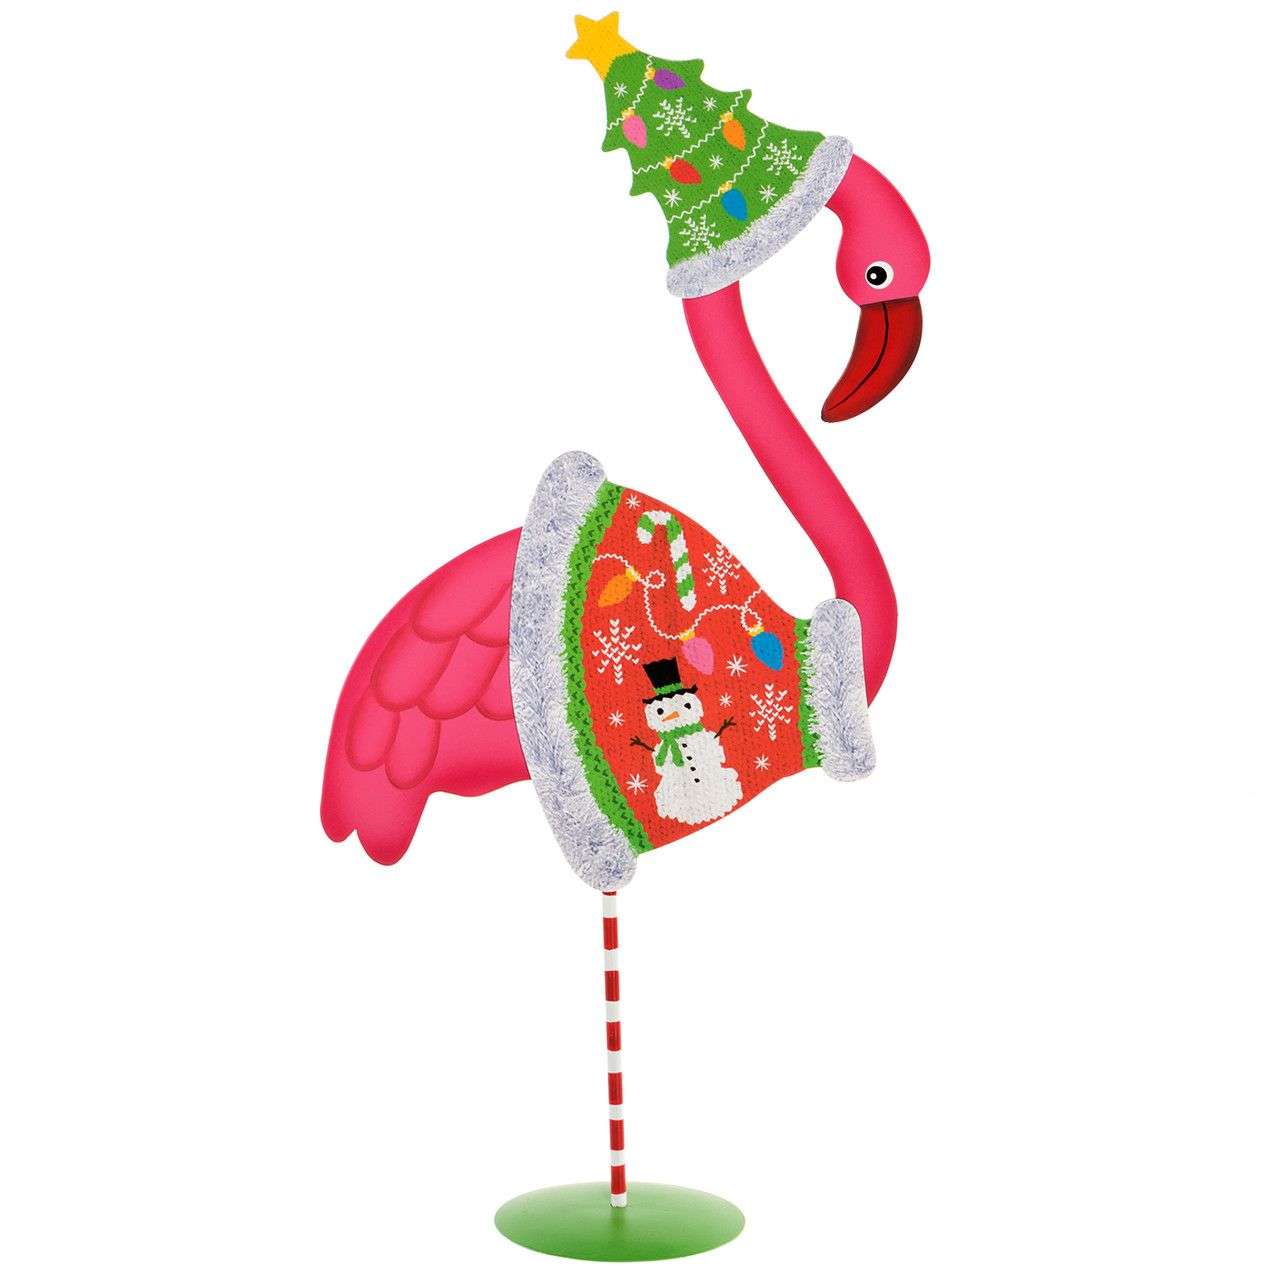 Dress-Up Pink Flamingo Decoration with Ugly Christmas Sweater